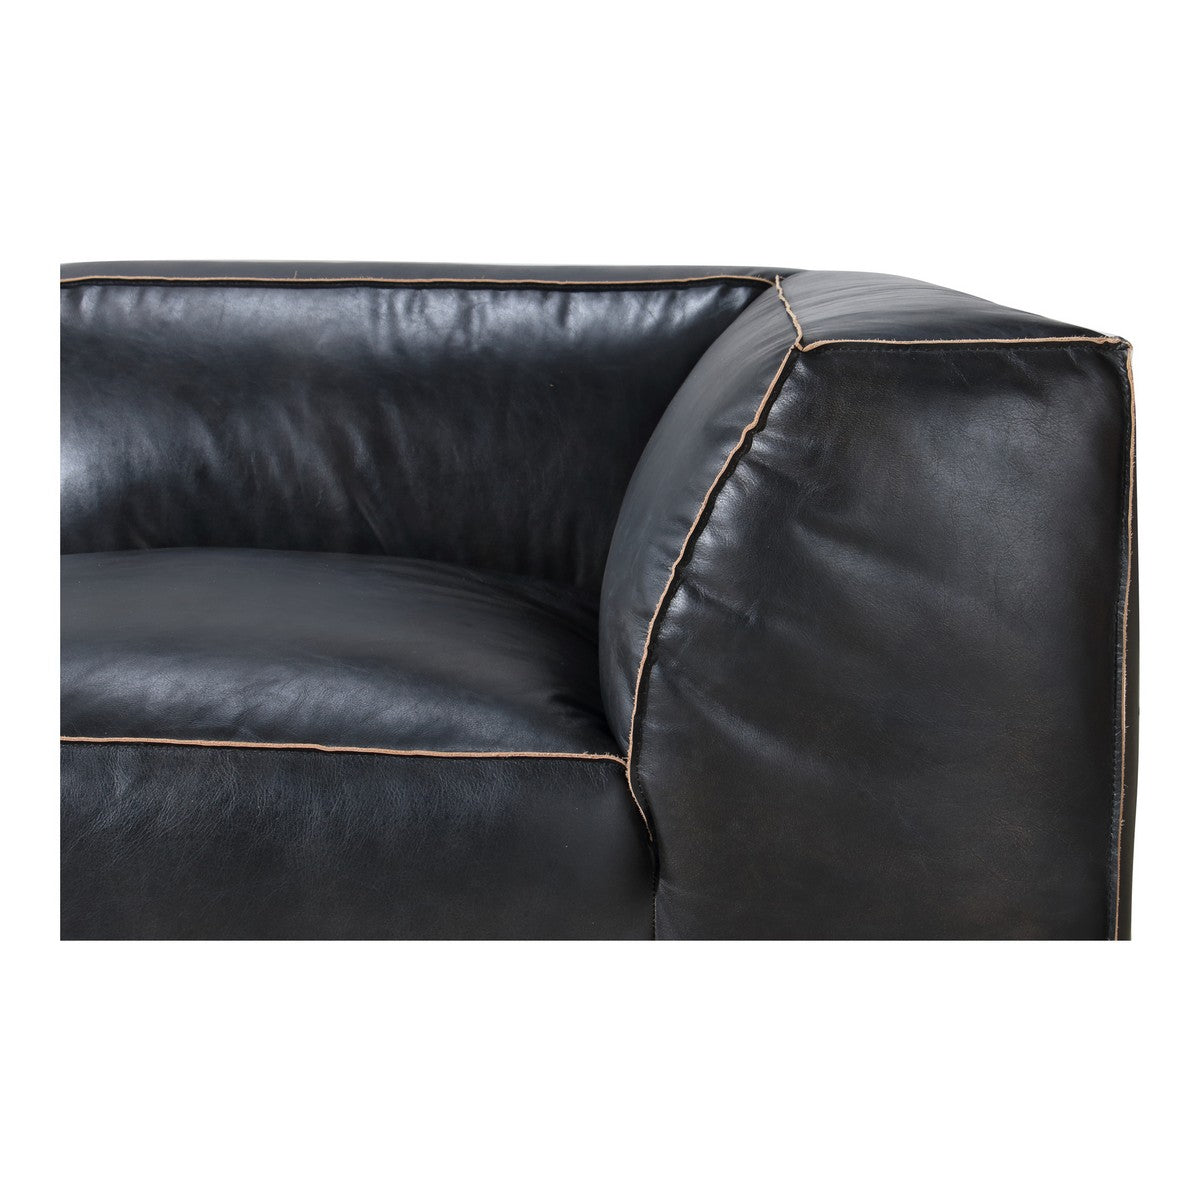 Moe's Home Collection Luxe Corner Chair Antique Black - QN-1021-01